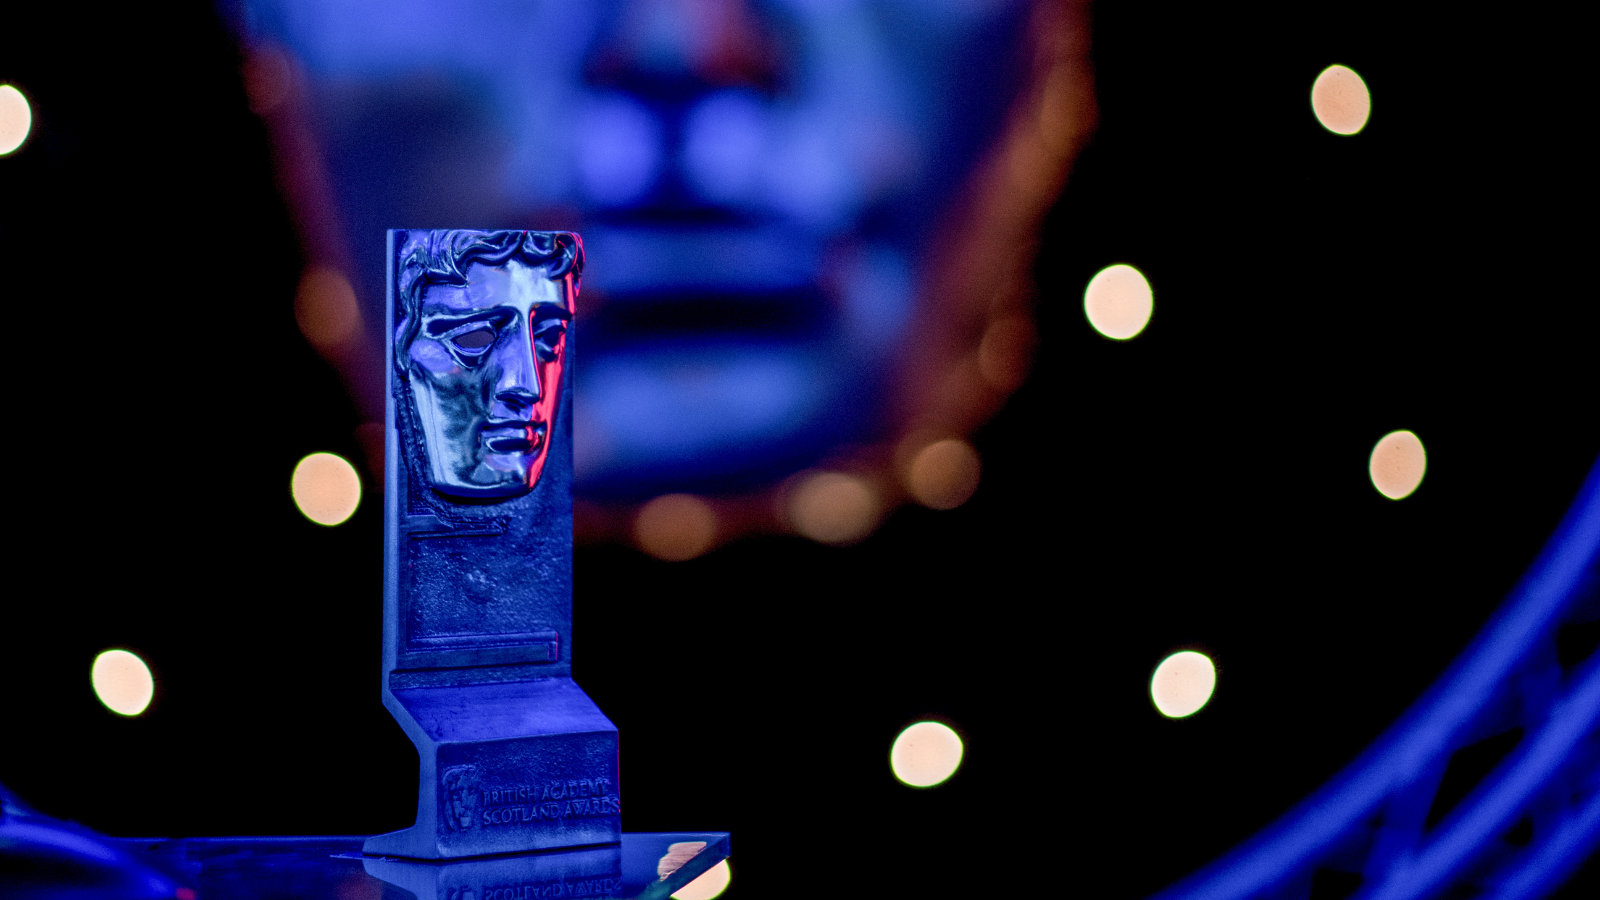 Bafta award sitting on a table and lit up with blue and red lights.